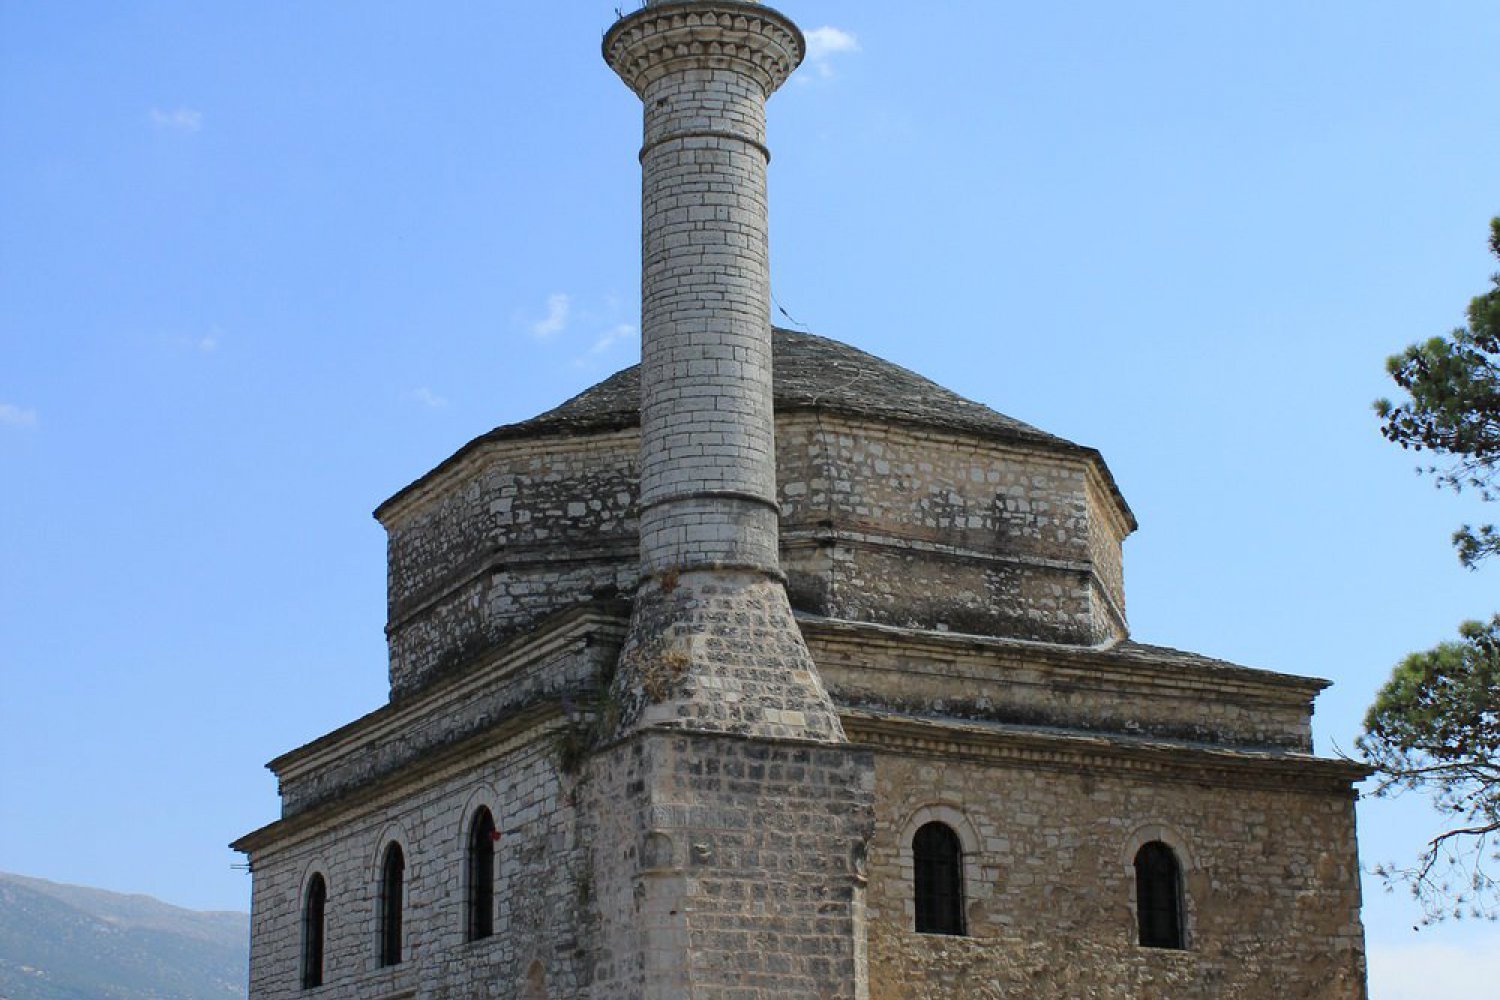 The Fethiye Mosque